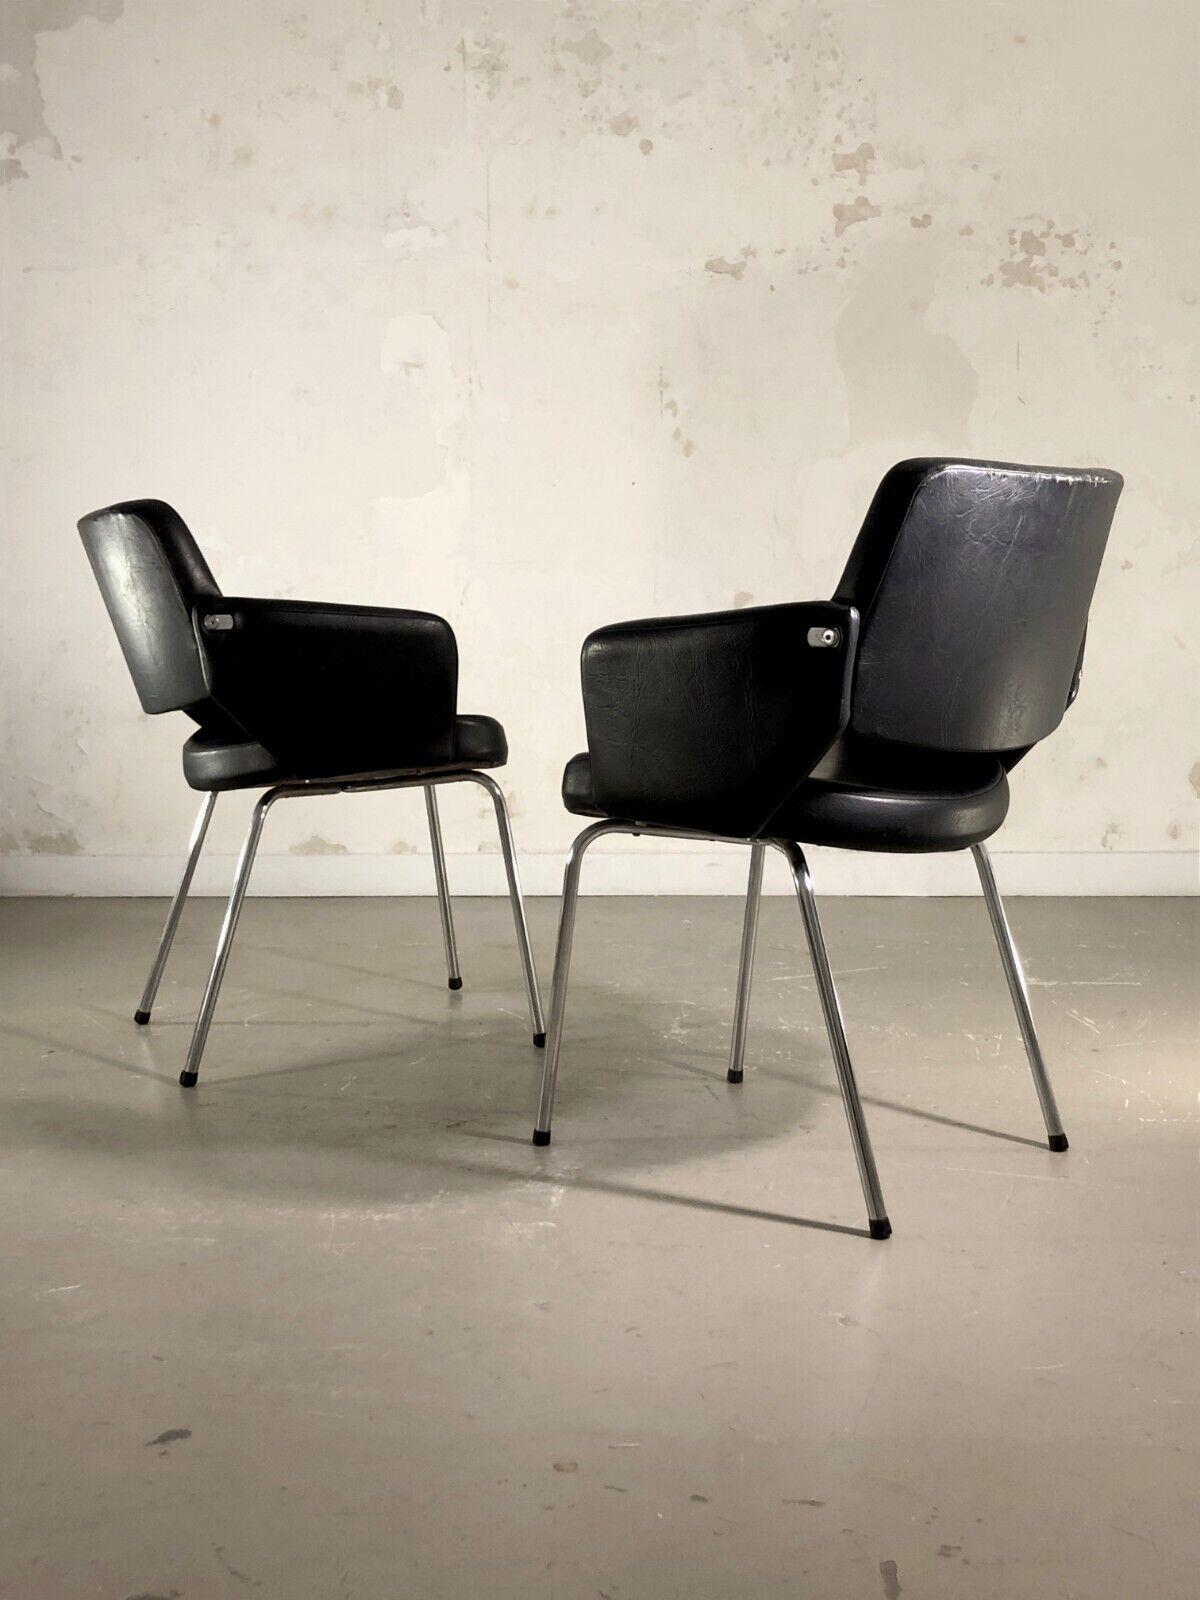 A Pair of MID-CENTURY-MODERN CHAIRS in ARP / MOTTE / GUARICHE Style, France 1950 For Sale 4